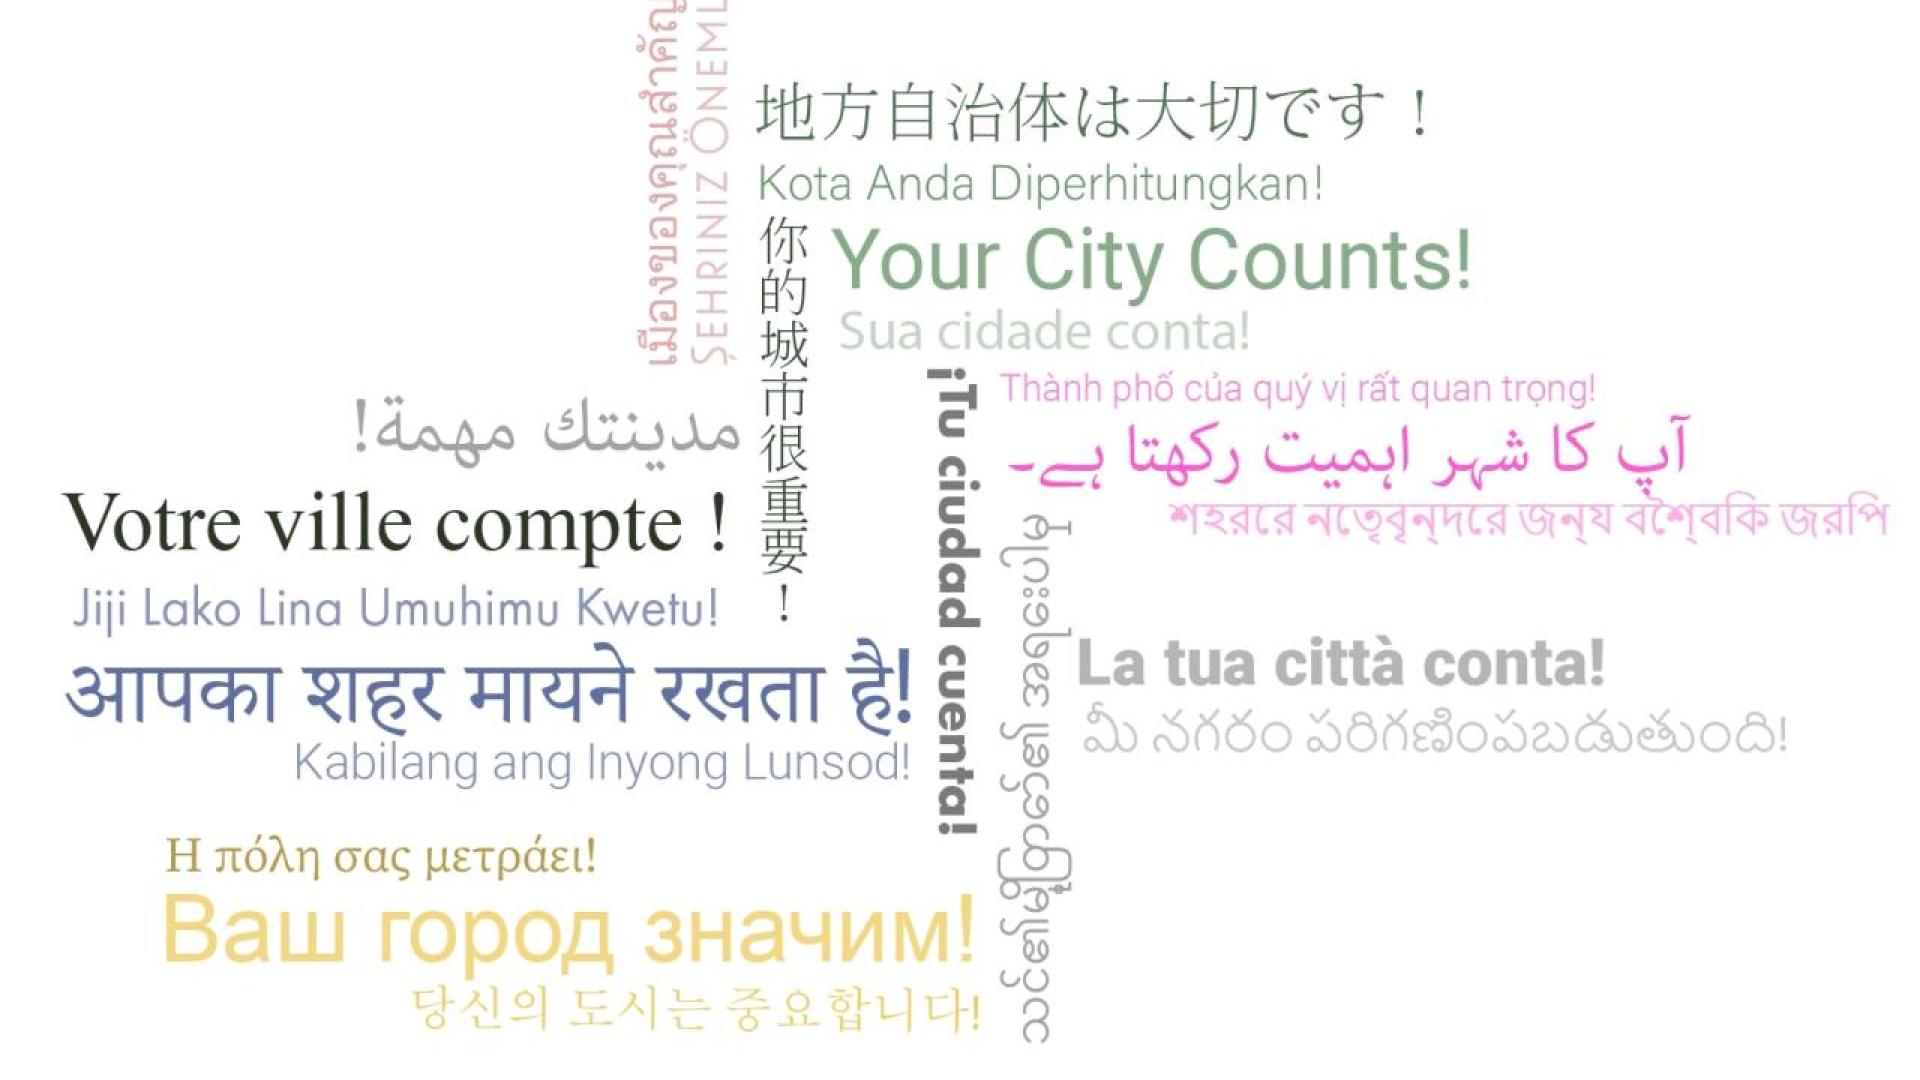 Your City Counts! written in multiple languages, each language is a different color